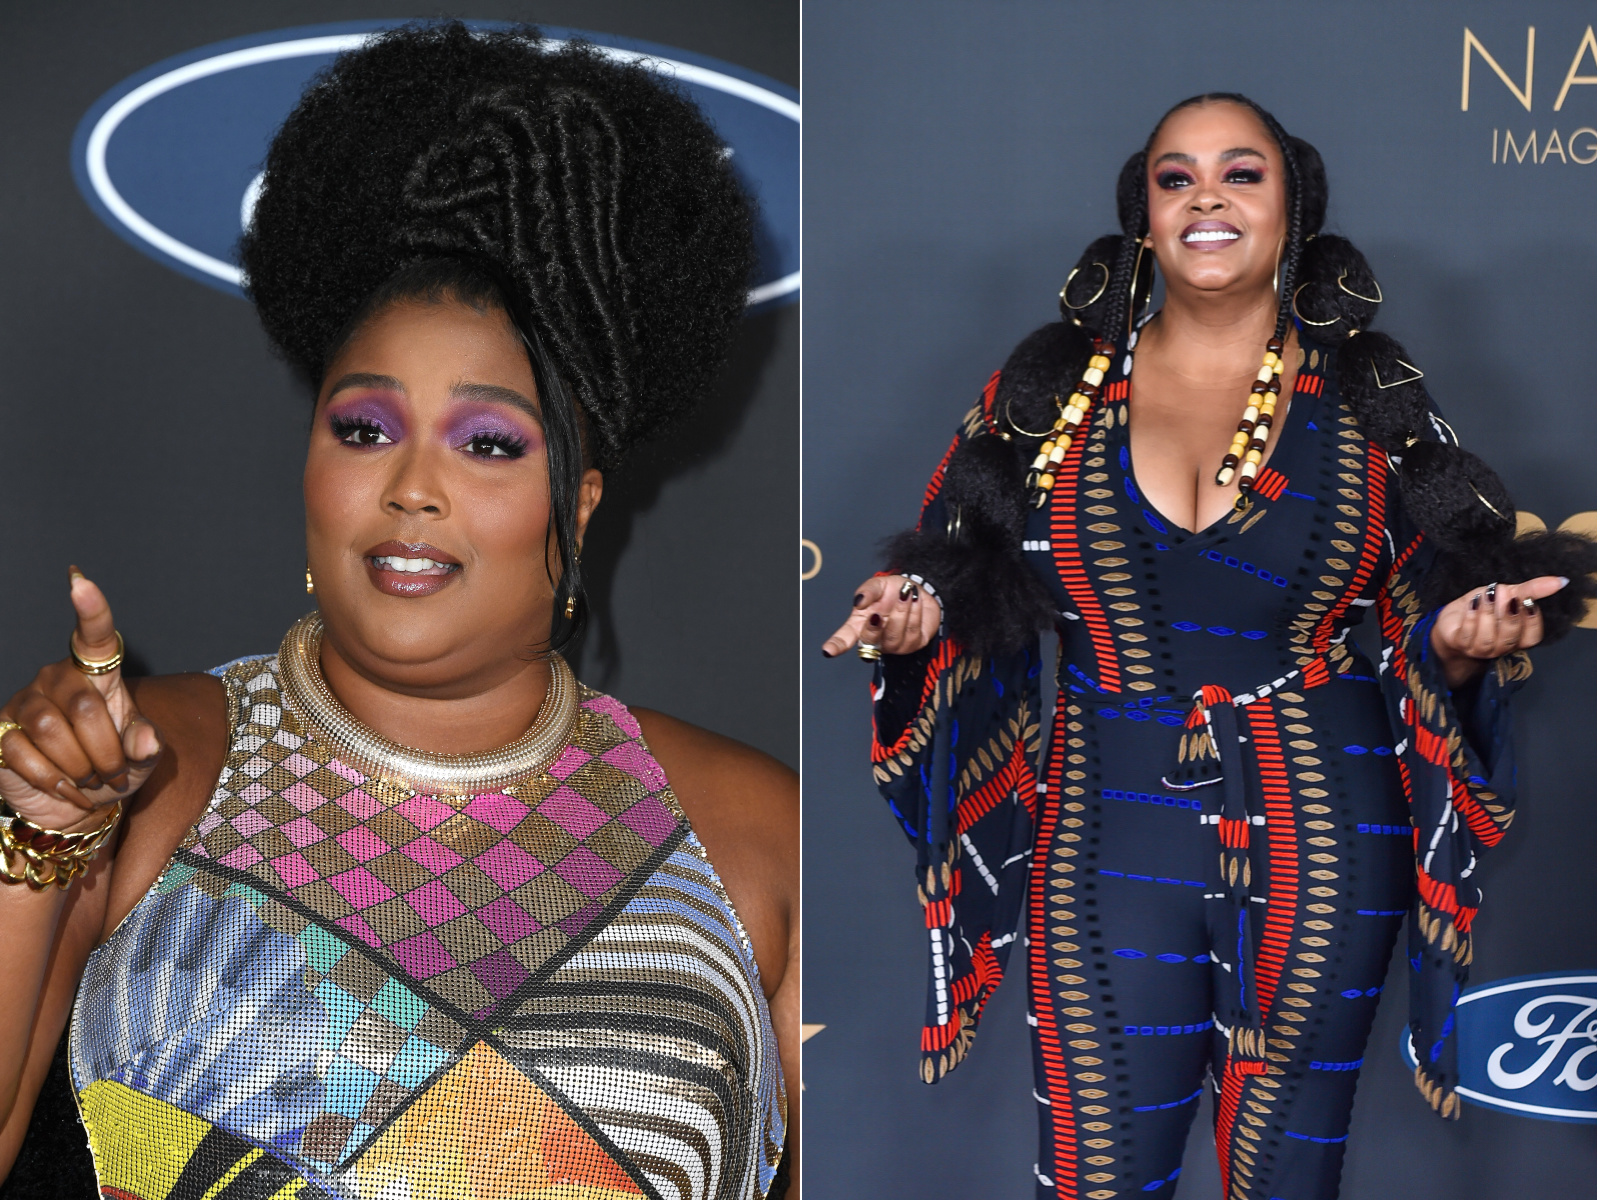 Jill Scott And Lizzo Are Treated Differently For An Obvious Reason